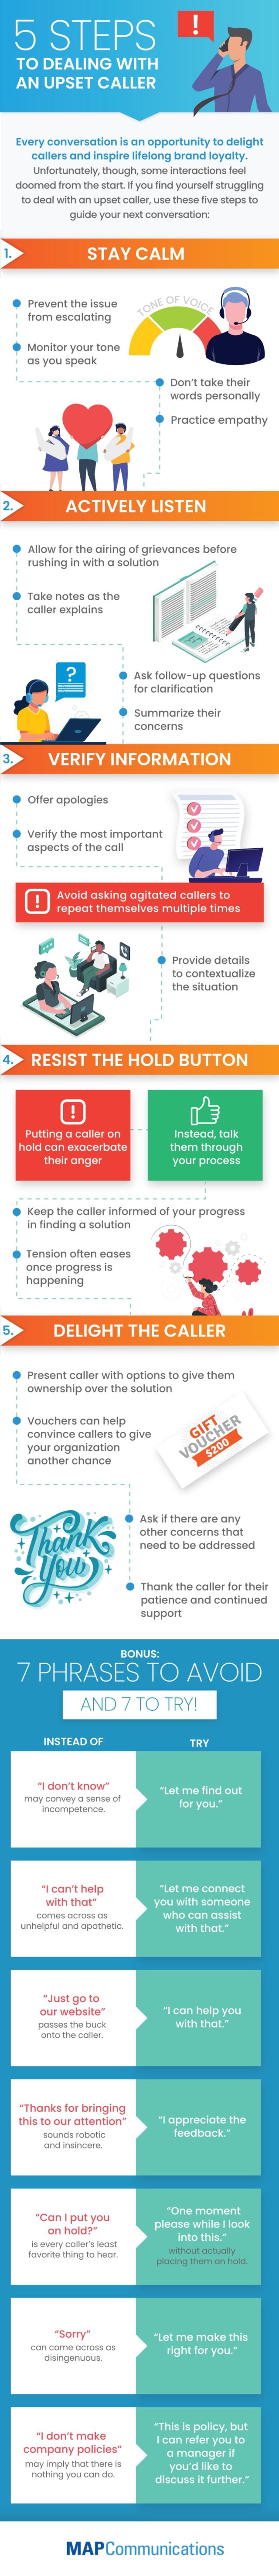 How to Deal with Upset Callers